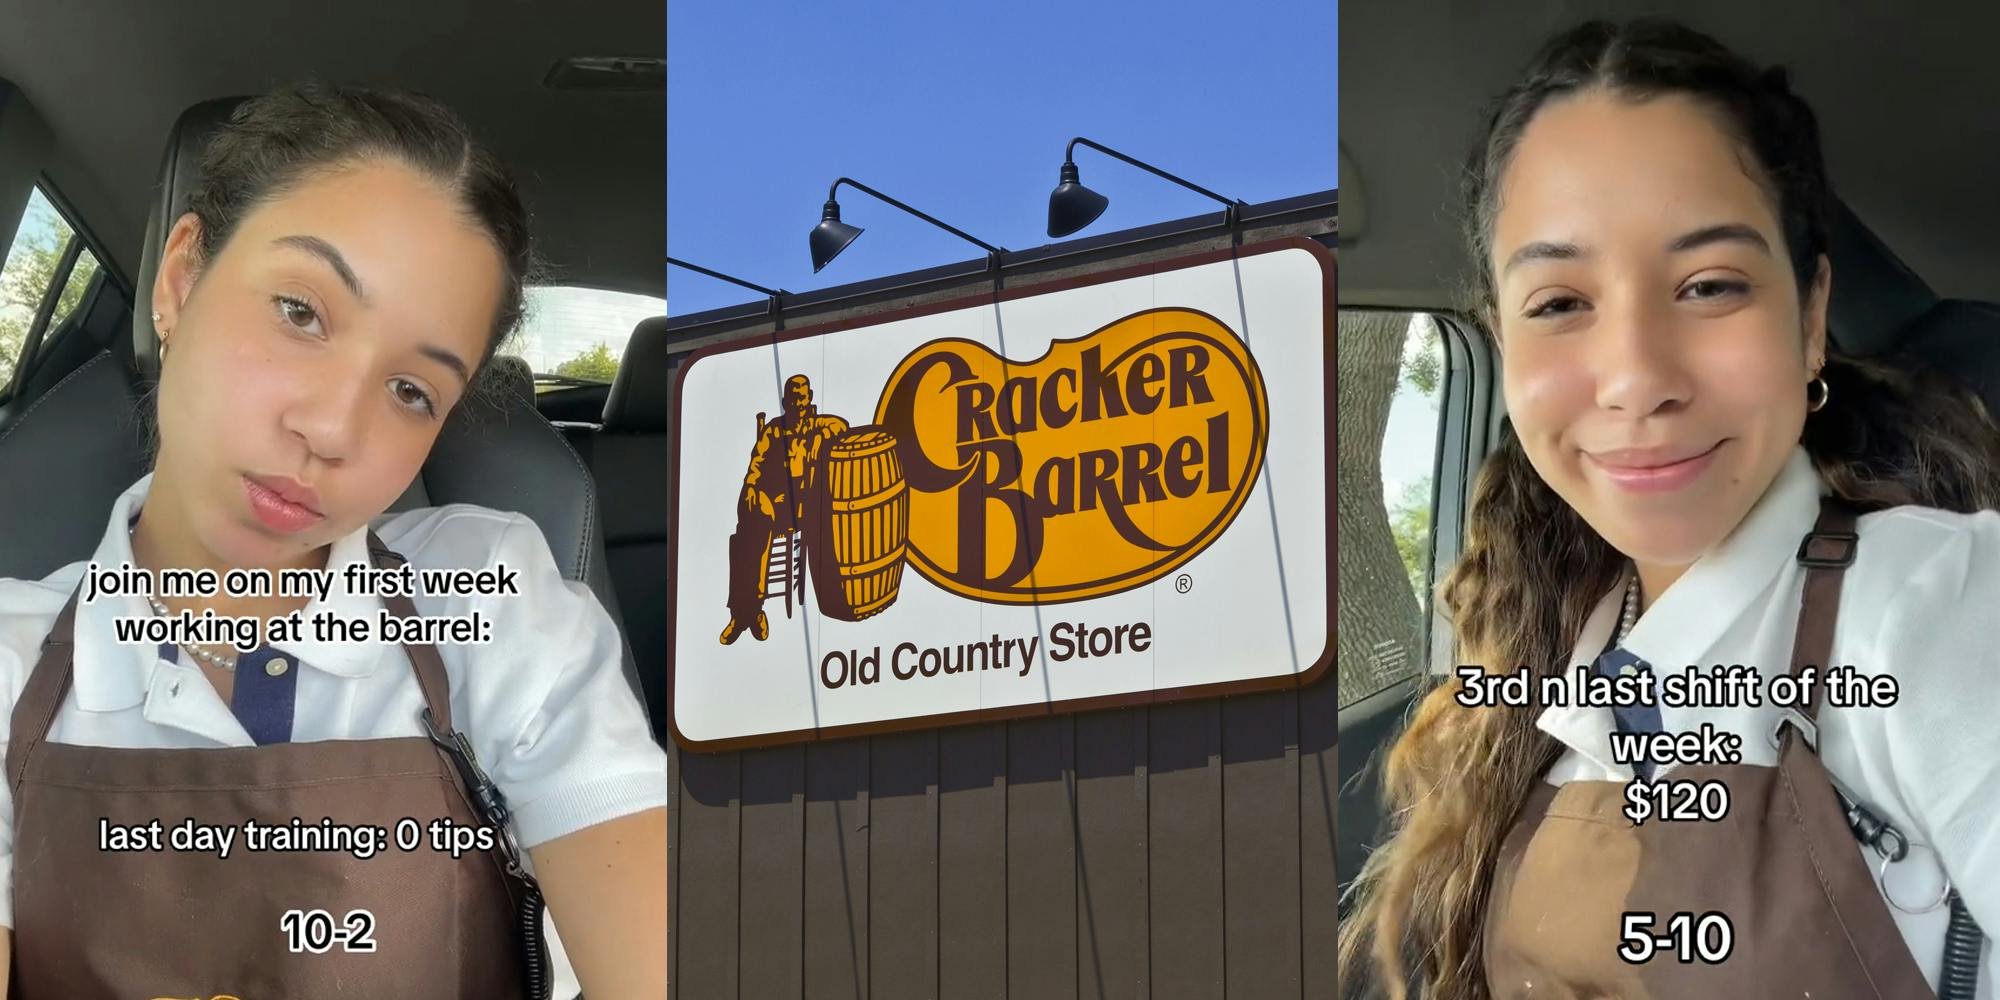 'Money will get better with time!': Cracker Barrel worker shows what she makes in tips during her first week